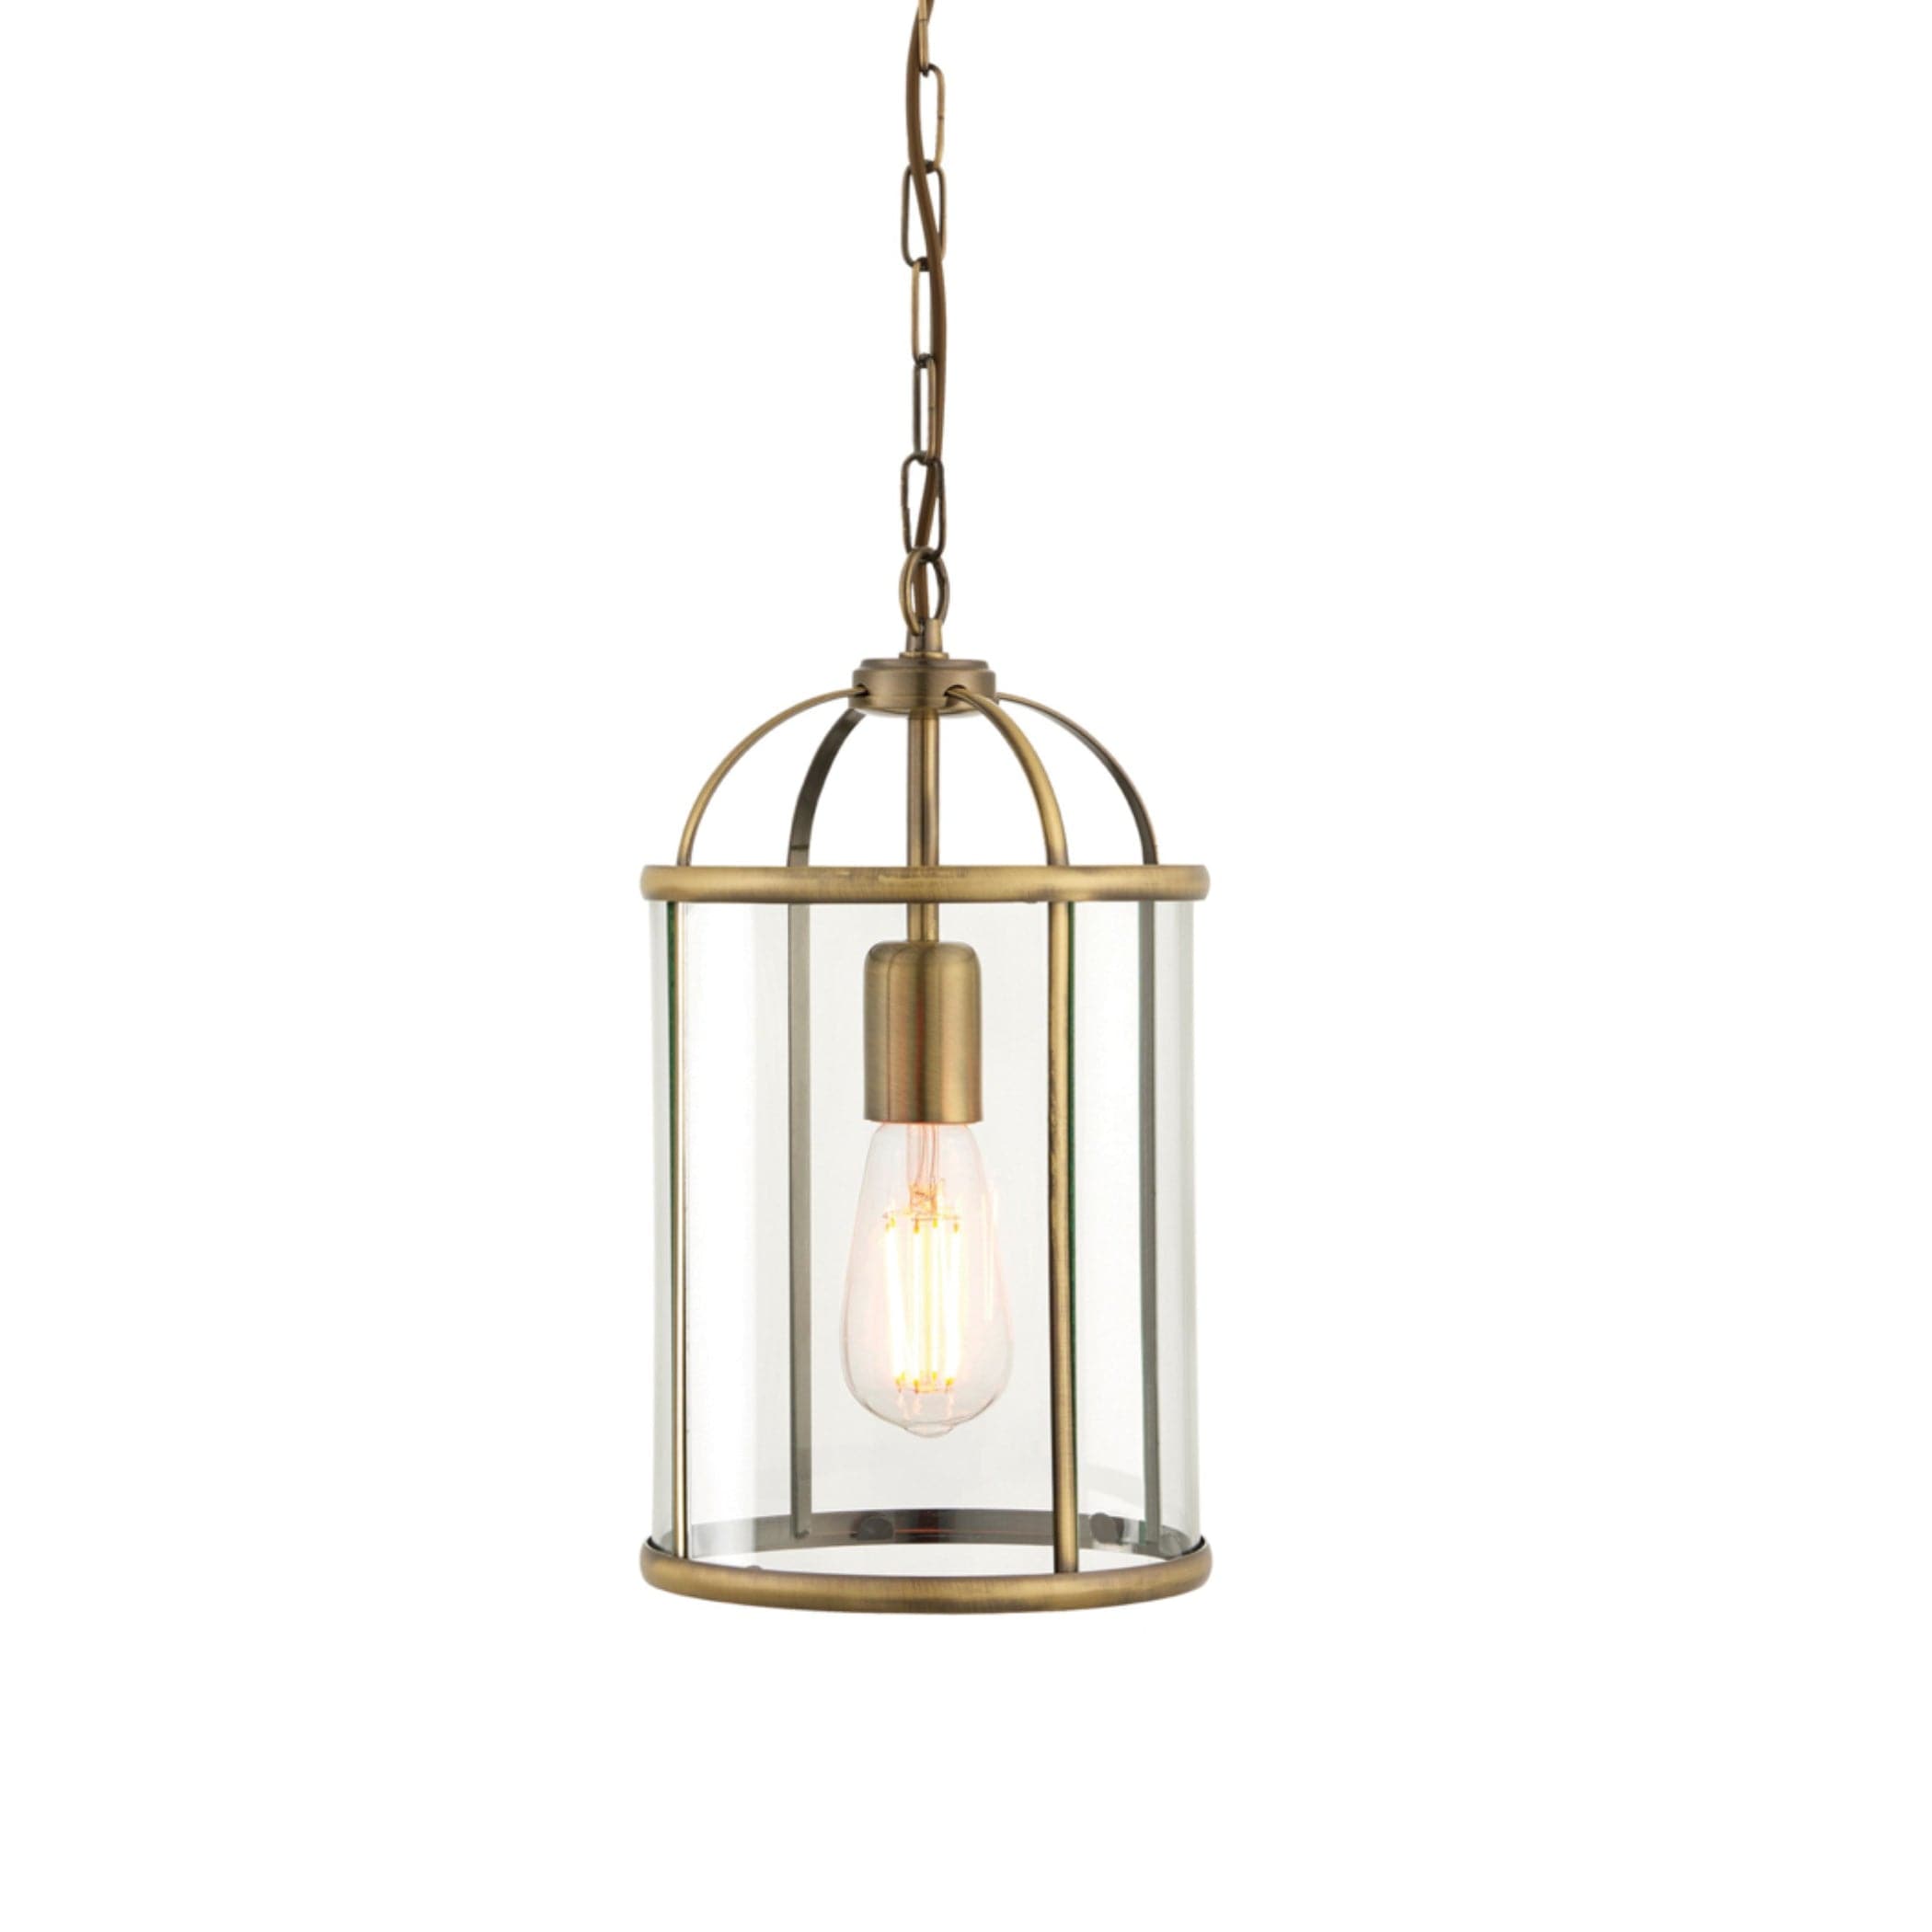 Antiqued Brass and Glass Portland Pendant Light 2